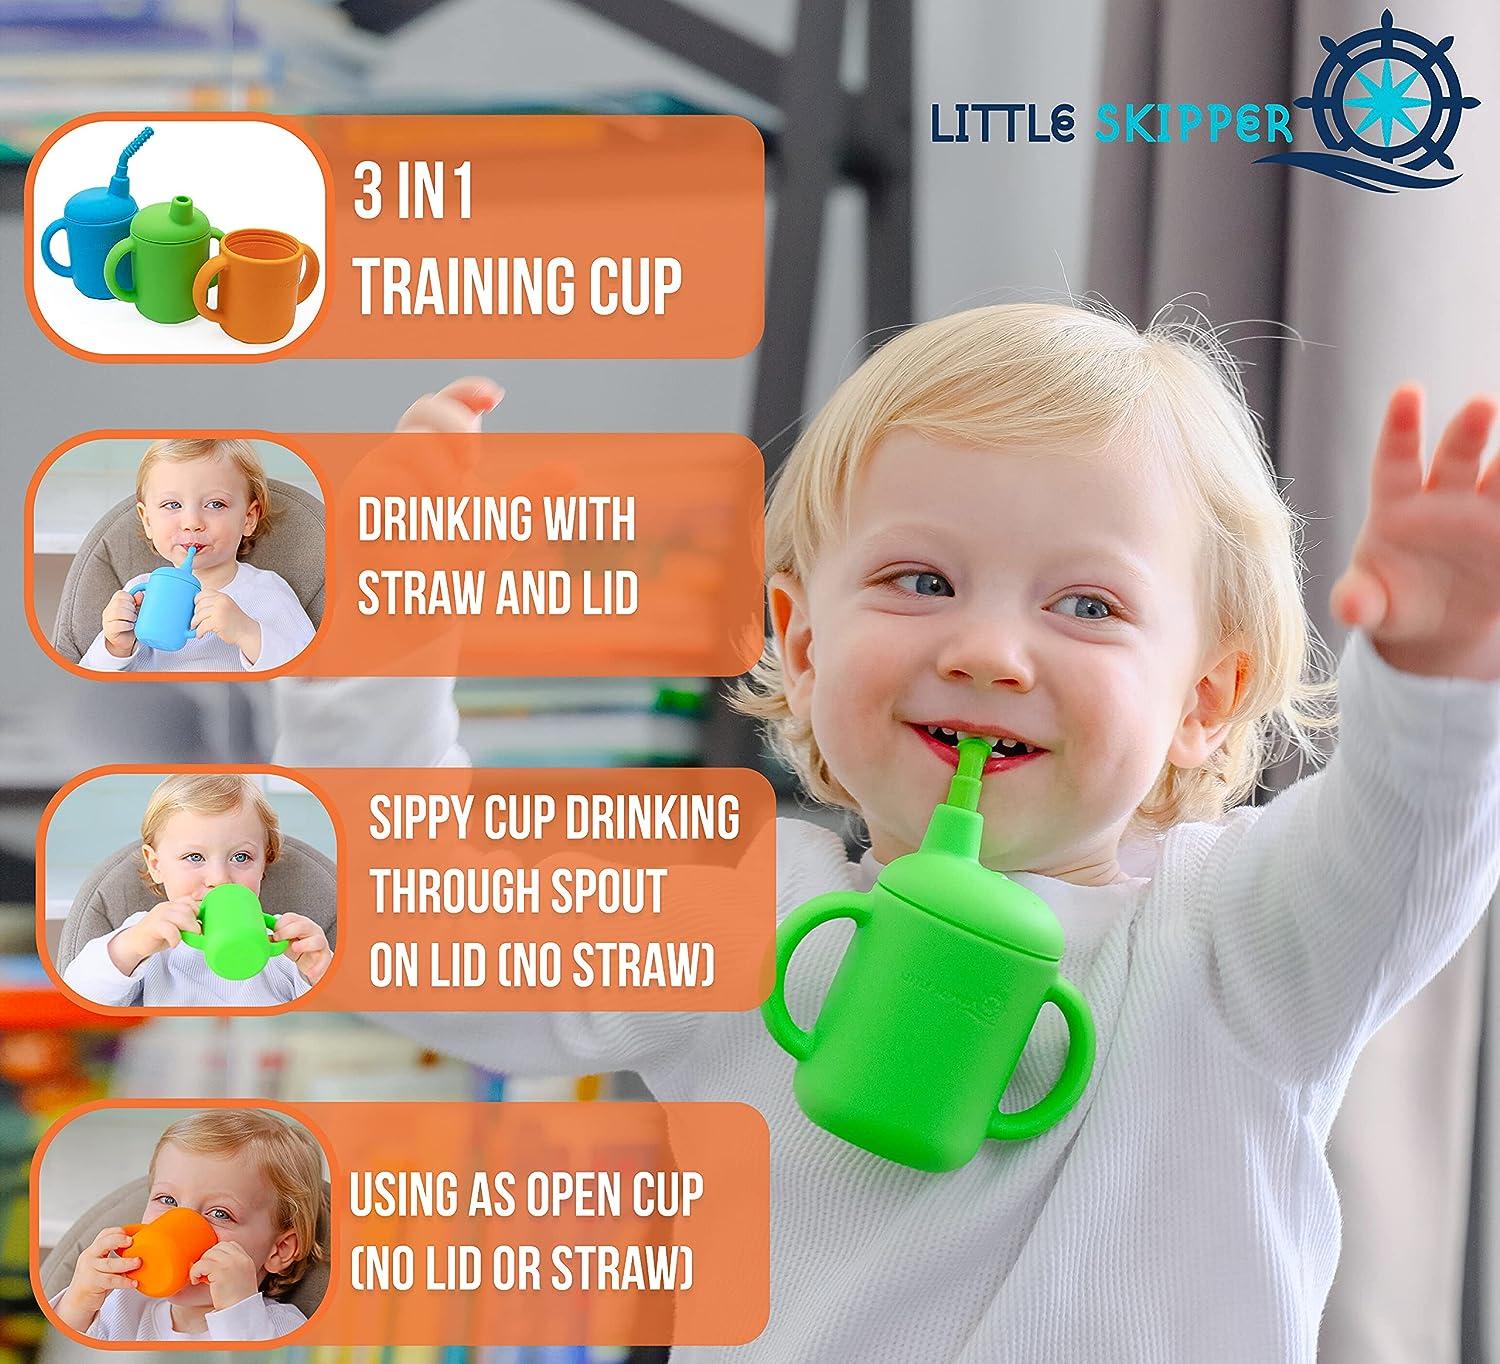 Toddler Sippy Cups Sippy Cups for Baby 6+ Months Toddler Cups with Two Non  Slip Handle Transition Sippy Cups for Babies 6-12 Months And Toddlers 1-3  Years No-Spill Sippy Cups For Toddlers 5oz